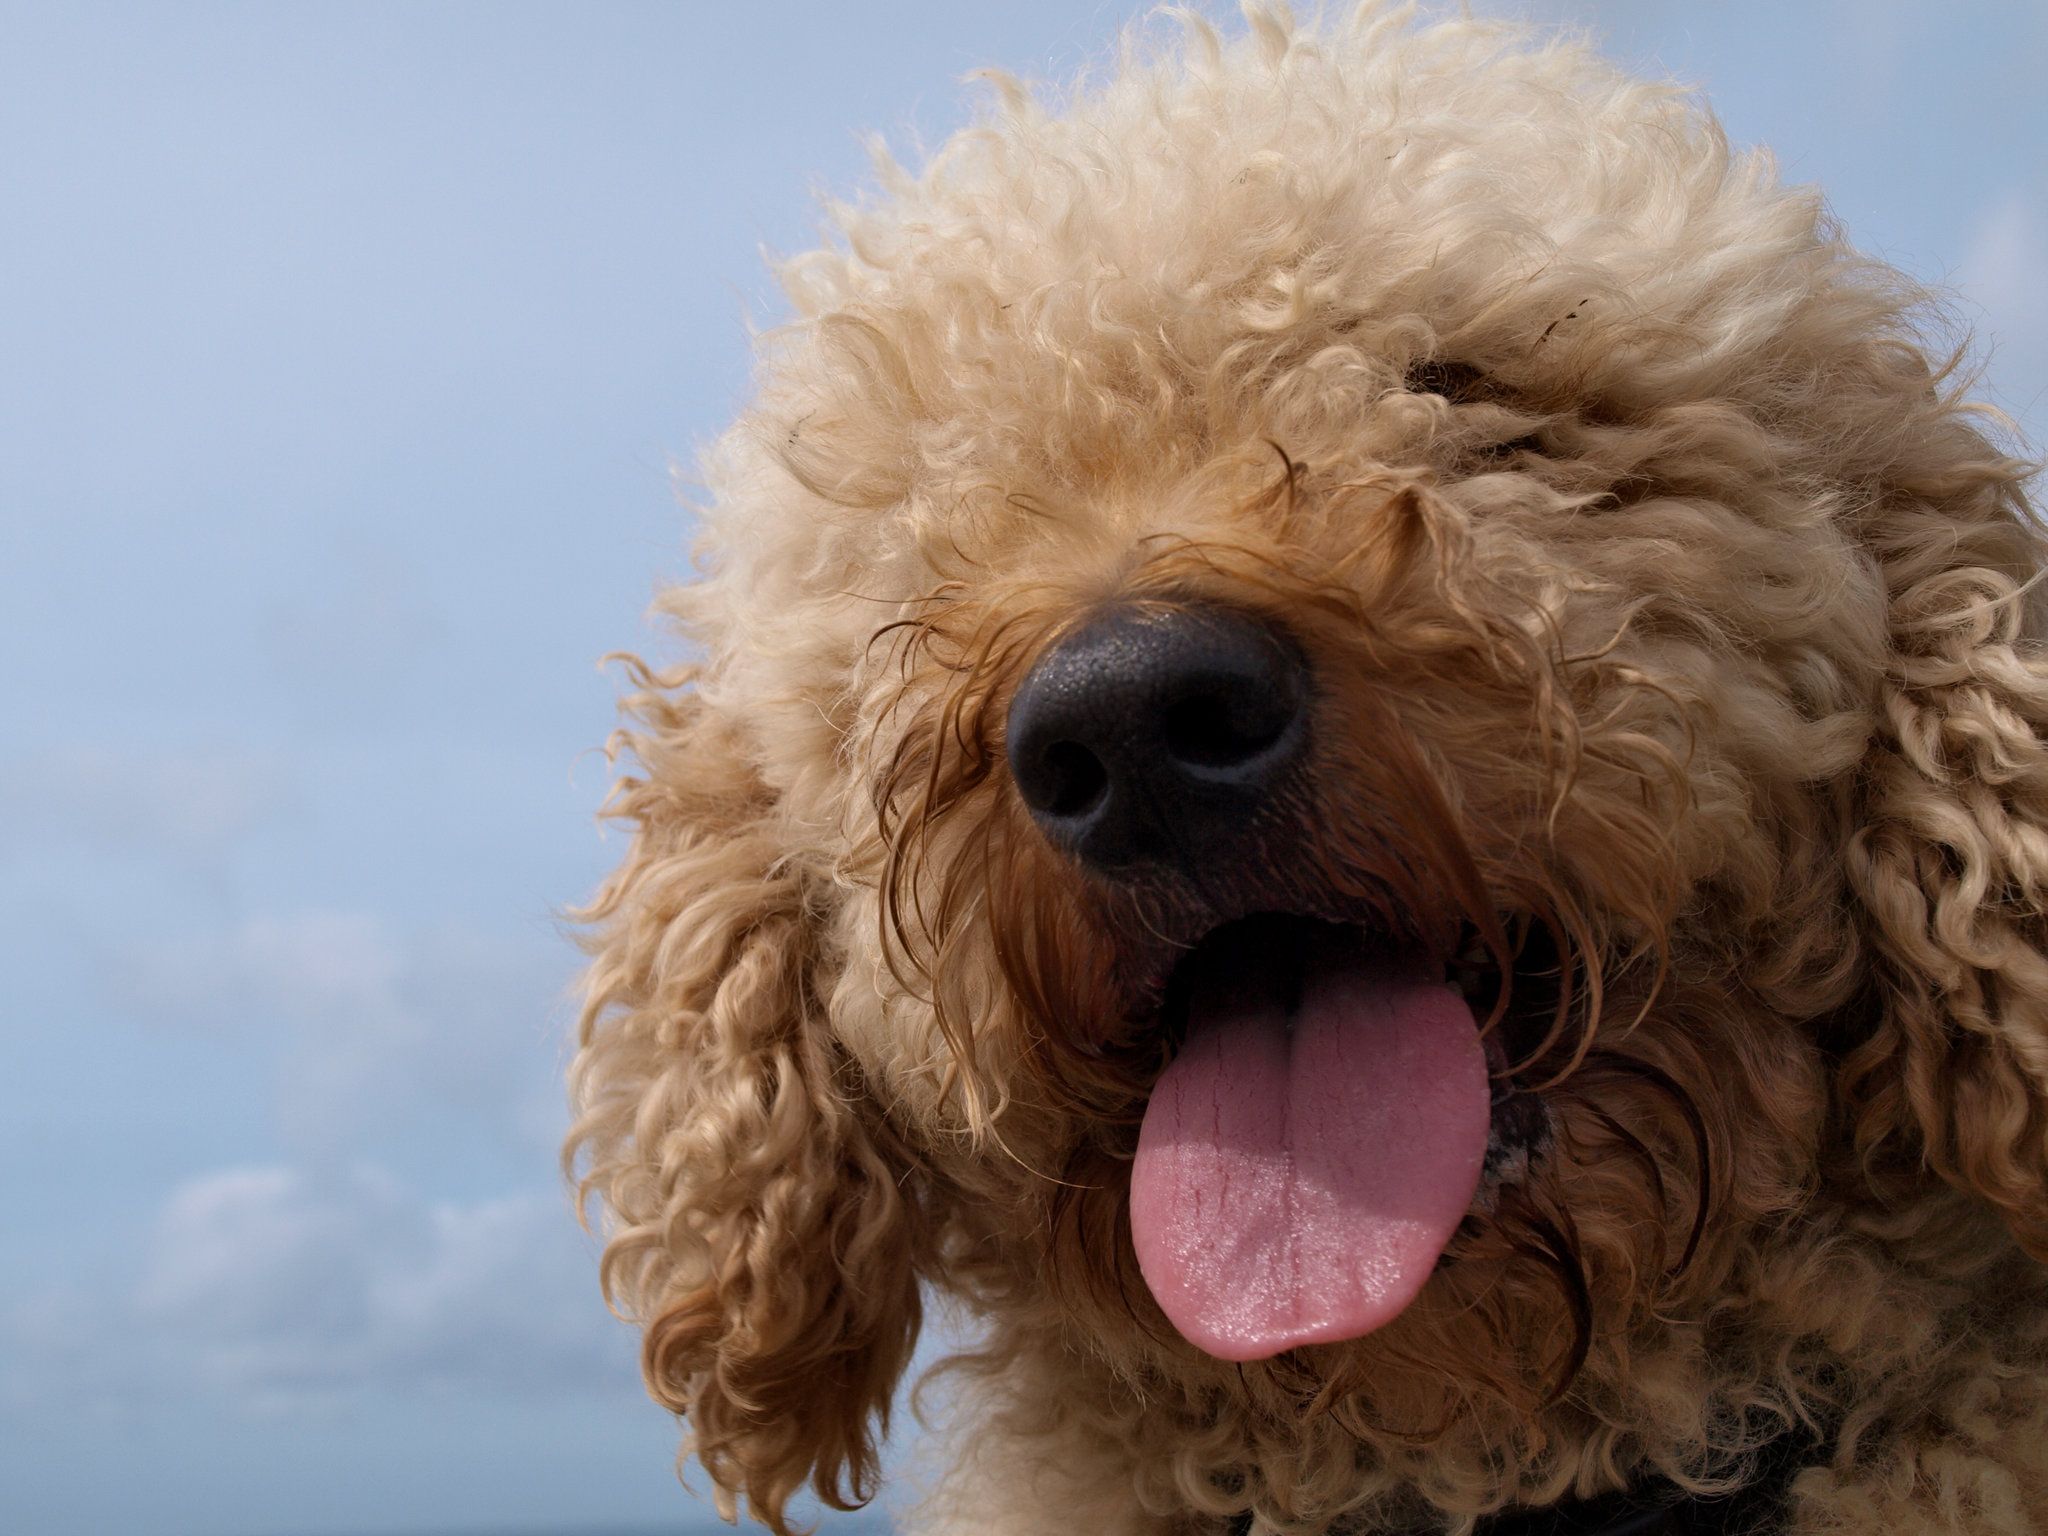 Labradoodle Creator Says the Breed Is His Life's Regret